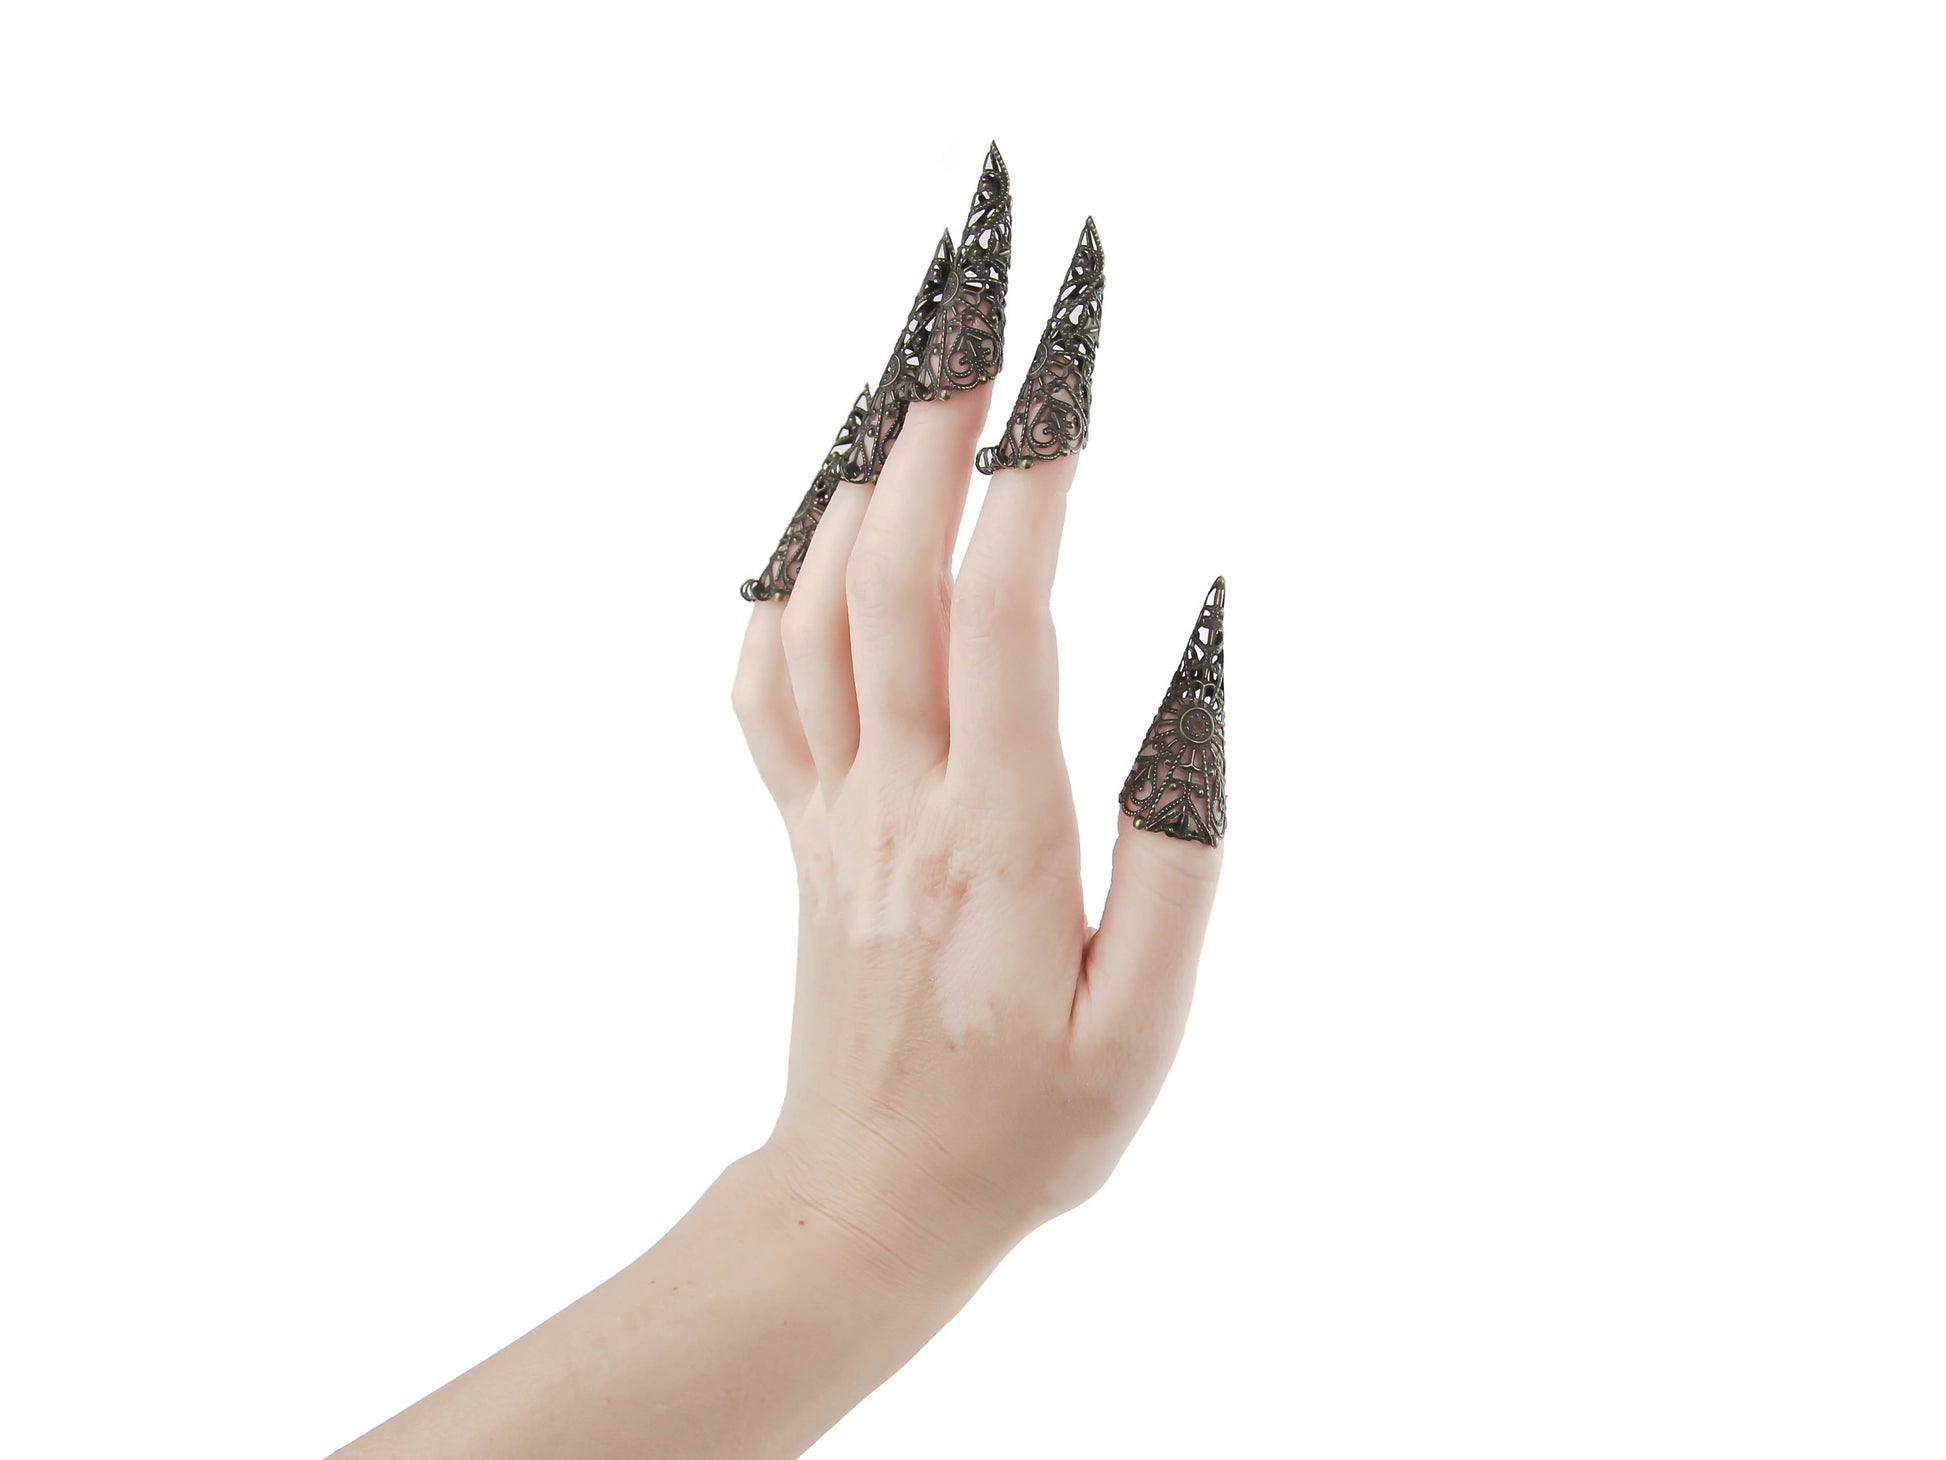 An elegant Myril Jewels creation, this full hand set of bronze nail claws is artfully designed with intricate filigree, perfect for those who love the dark-avantgarde aesthetic. Ideal for neo-gothic fashion enthusiasts, these nail claws make a bold statement, suitable for Halloween, embodying punk jewelry vibes, and adding an edgy twist to gothic-chic, whimsigoth, or witchcore styles for everyday wear or special events like rave parties and festivals